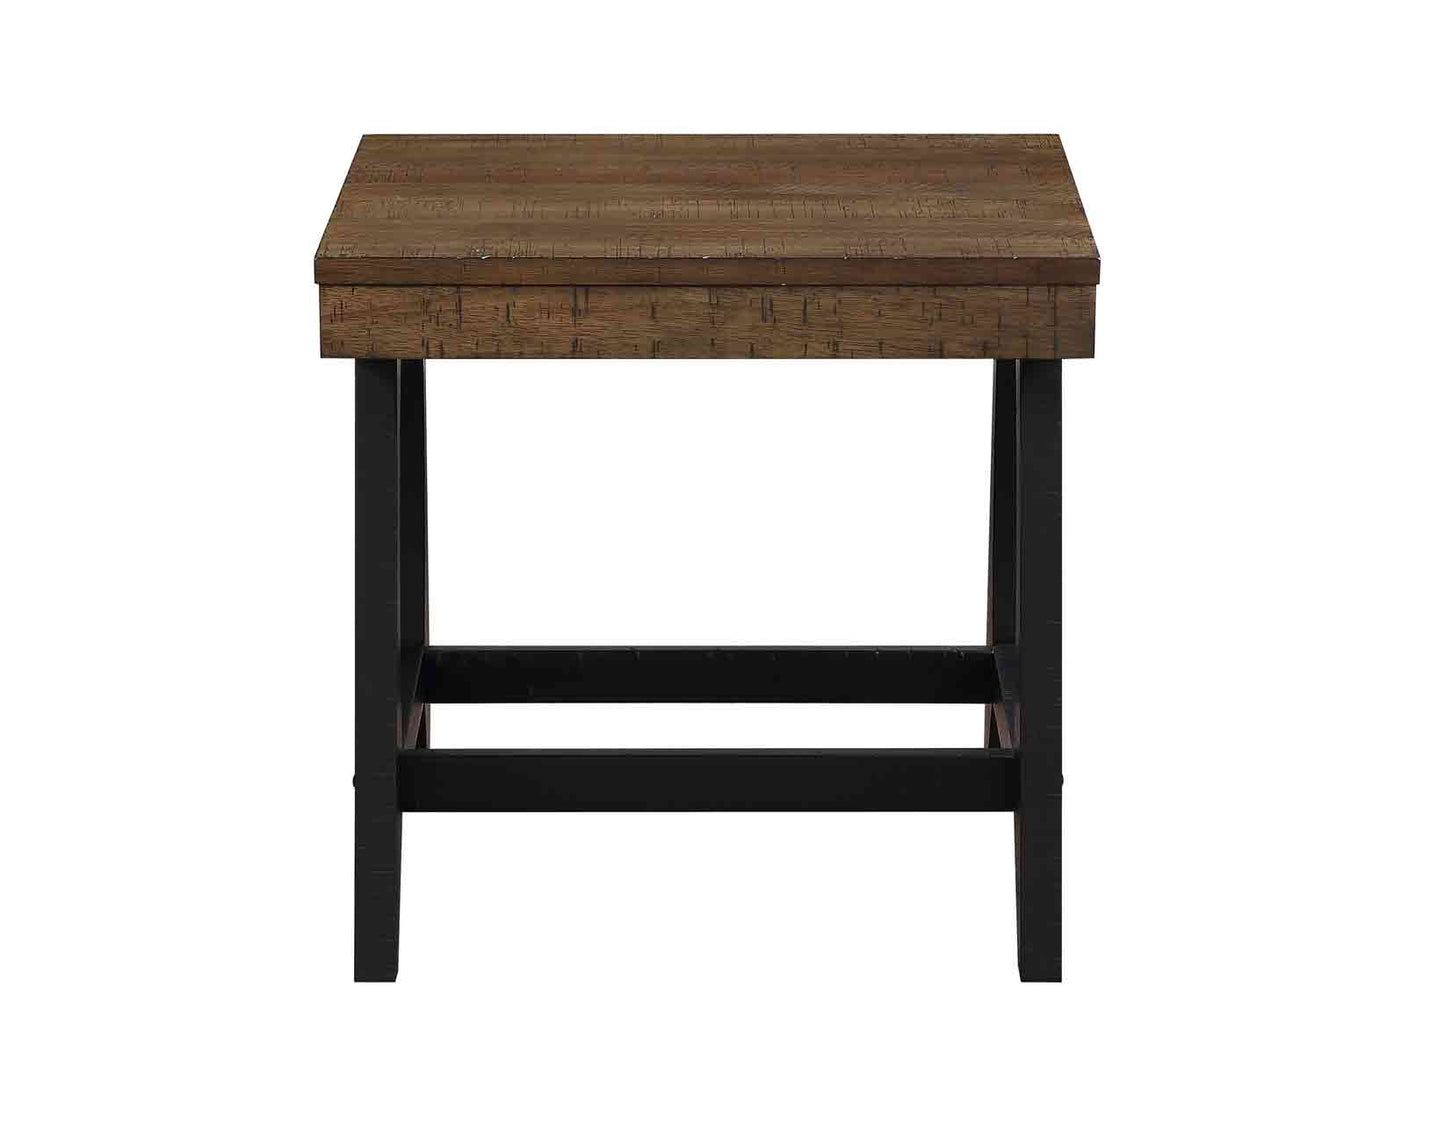 Ralston 3-Piece Lift-Top Set
(Lift-Top Cocktail Table & 2 End Tables)